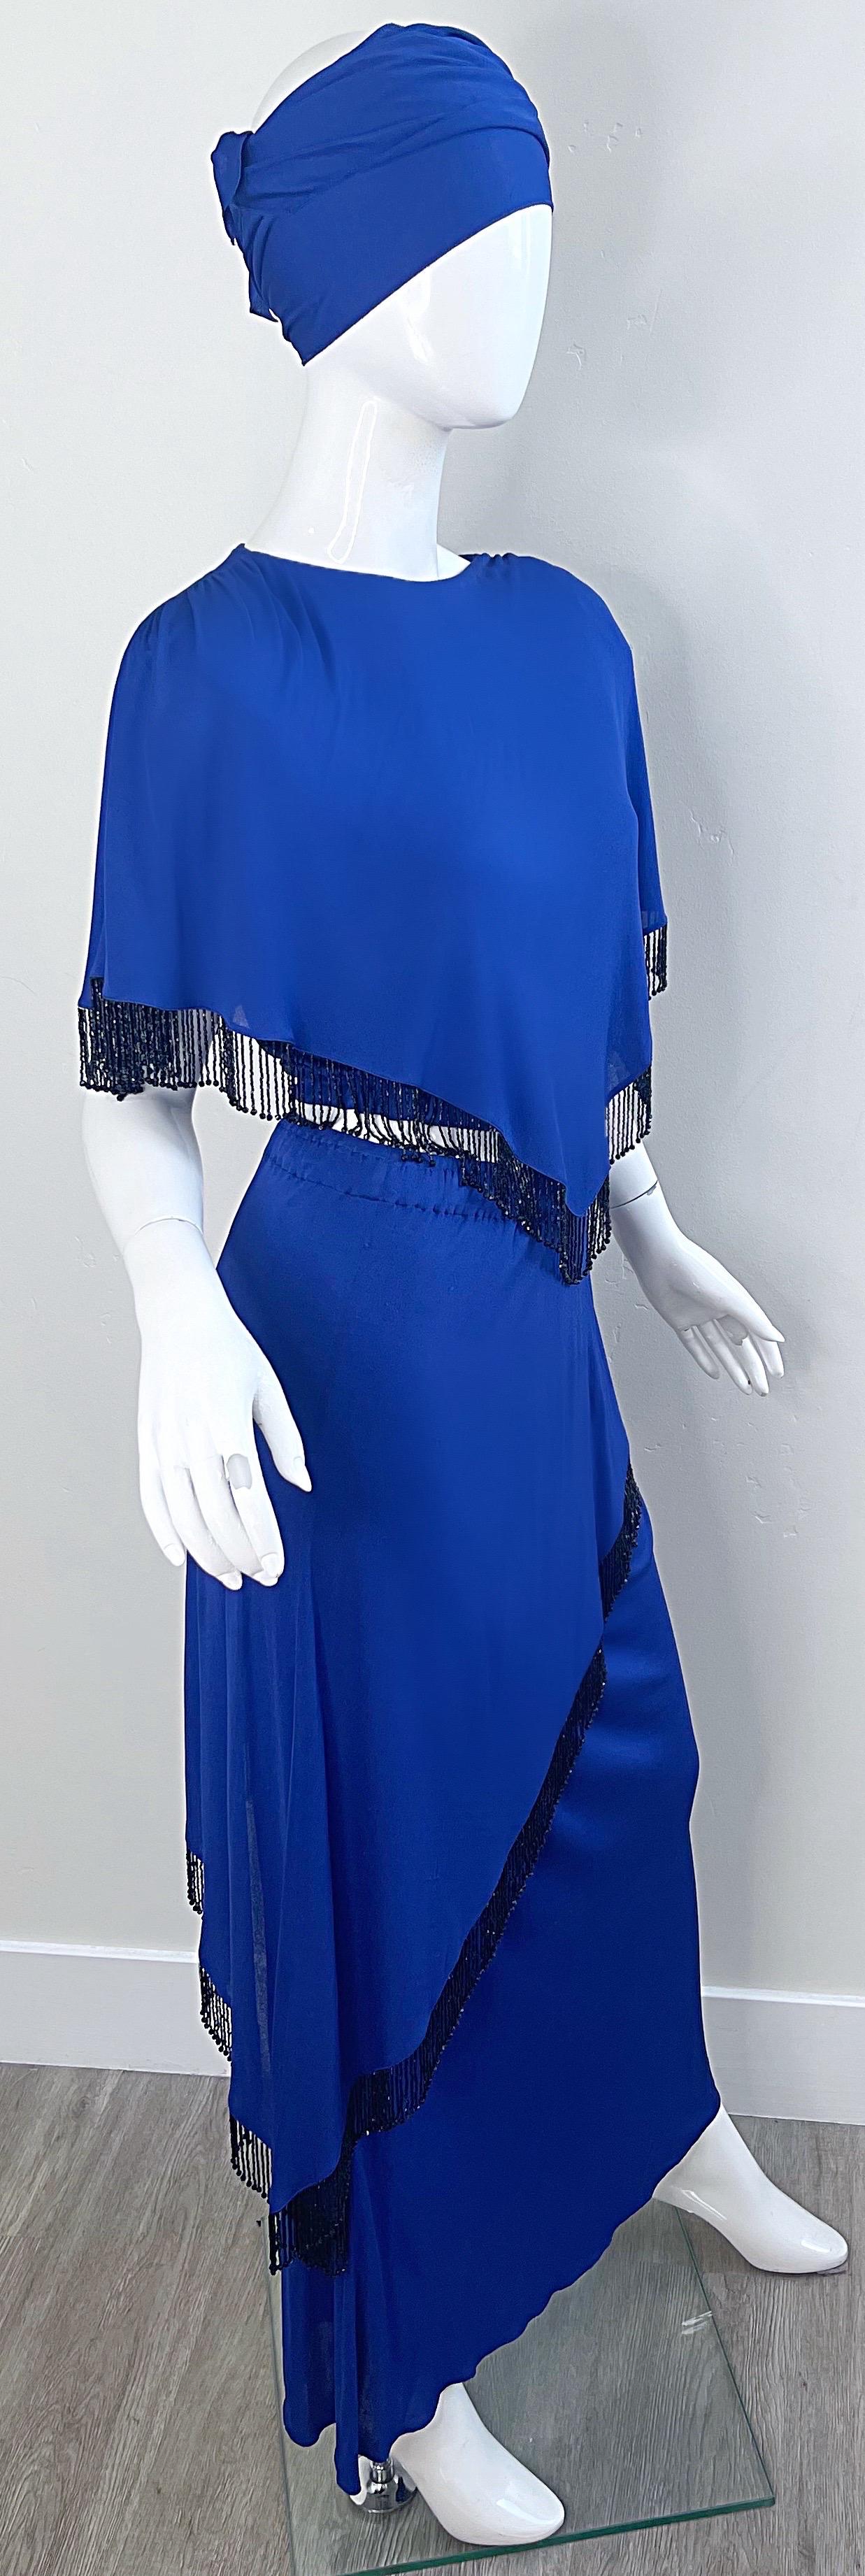 Holly’s Harp 1970s Royal Blue Silk Jersey Beaded 3 Piece Vintage 70s Ensemble For Sale 3